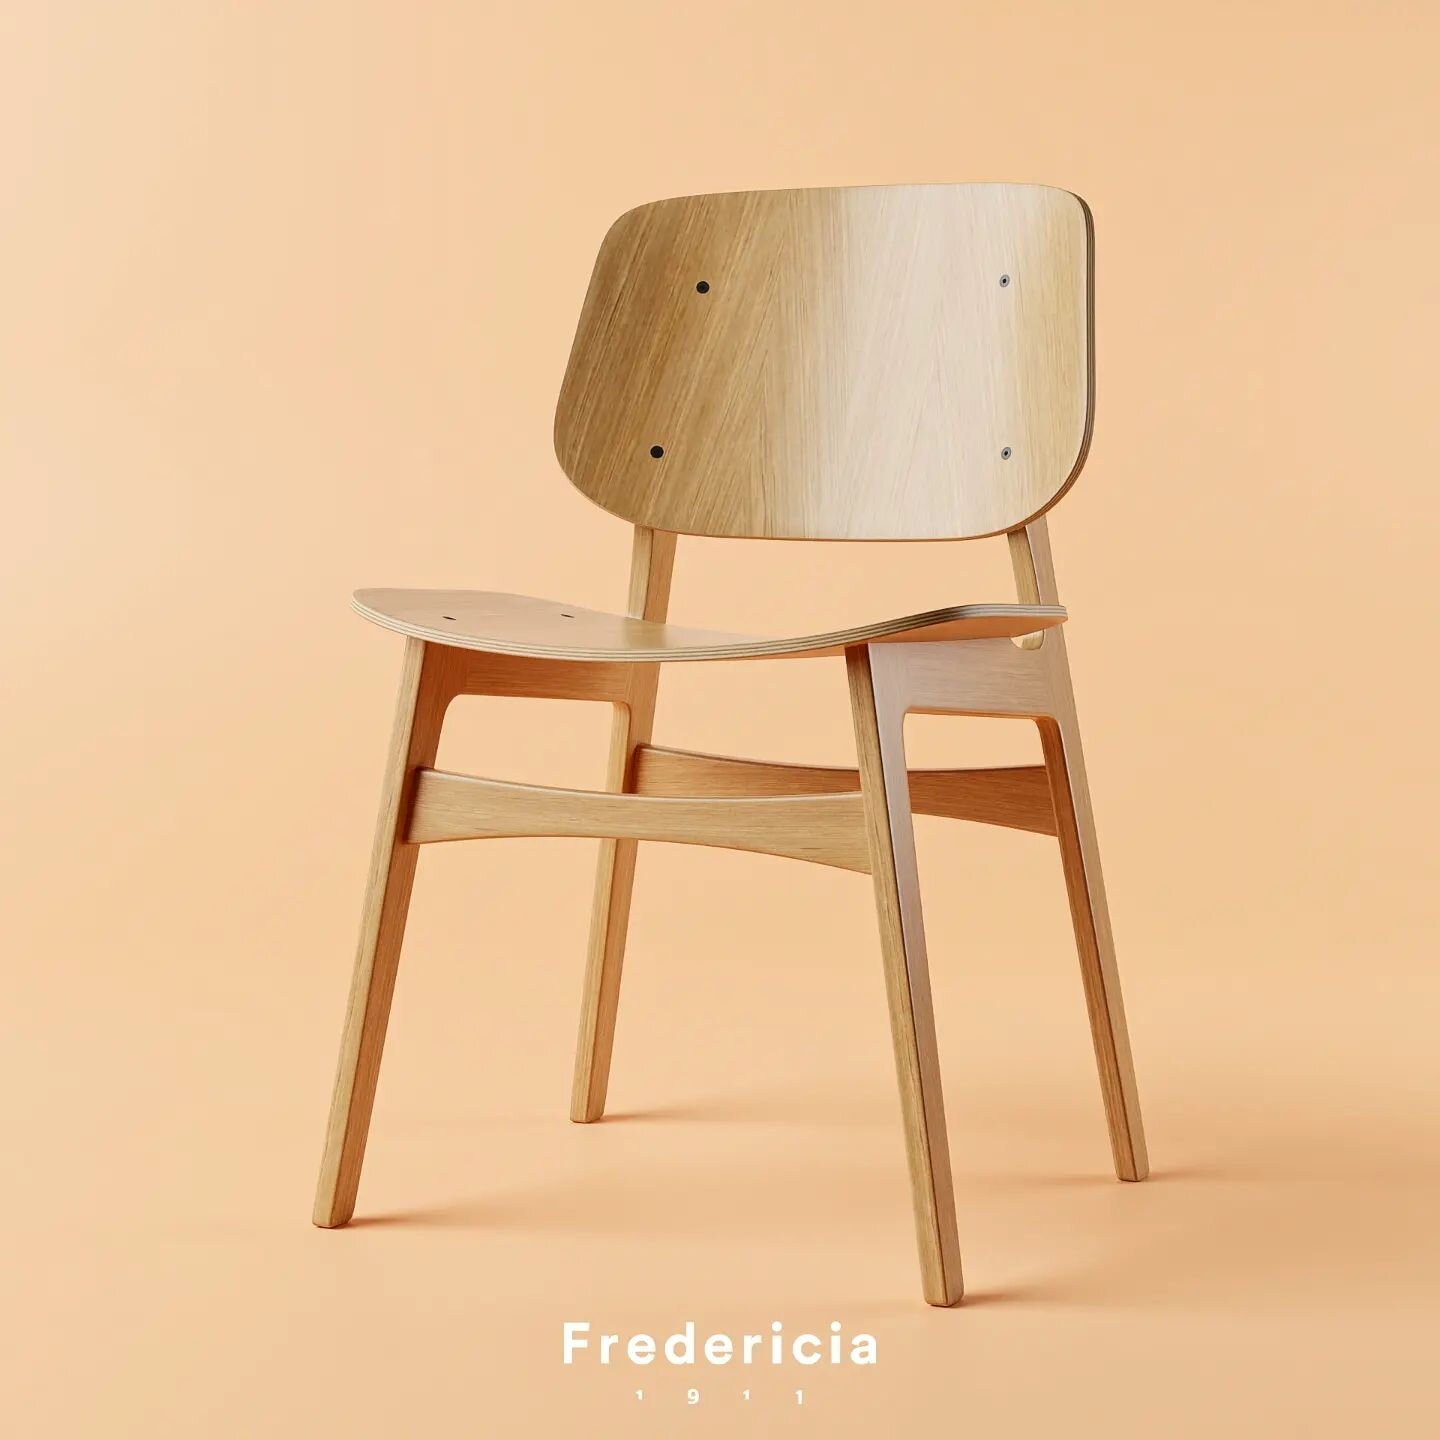 Some more #blender practice, this time modelling the Soborg Chair by @fredericiafurniture
.
.
.
#cgi #blender #fredericia #chair #3dmodelling #3drendering